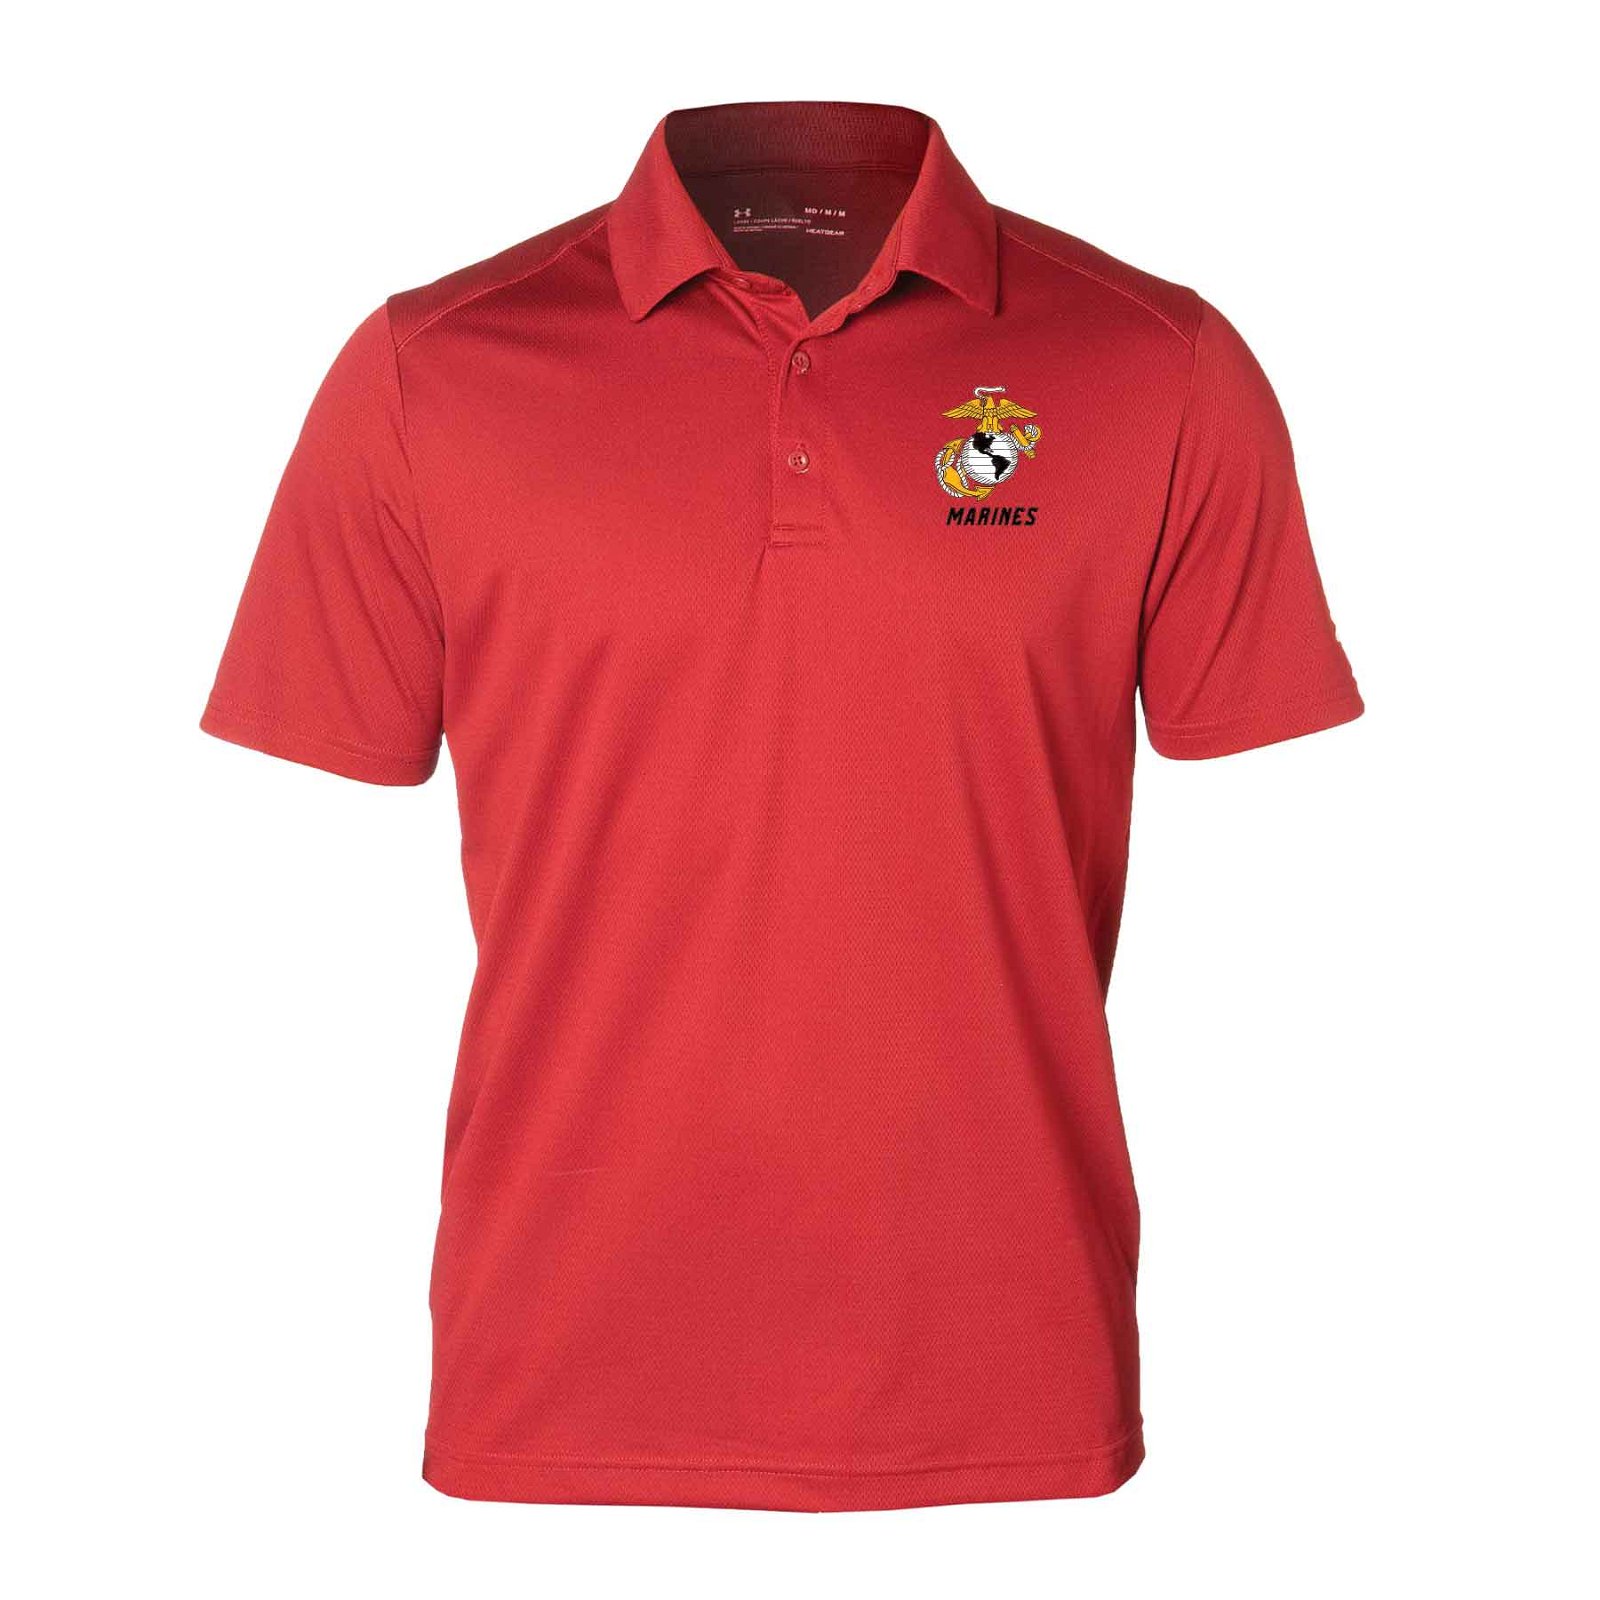 Image of Under Armour Marines Tech Polo 2.0